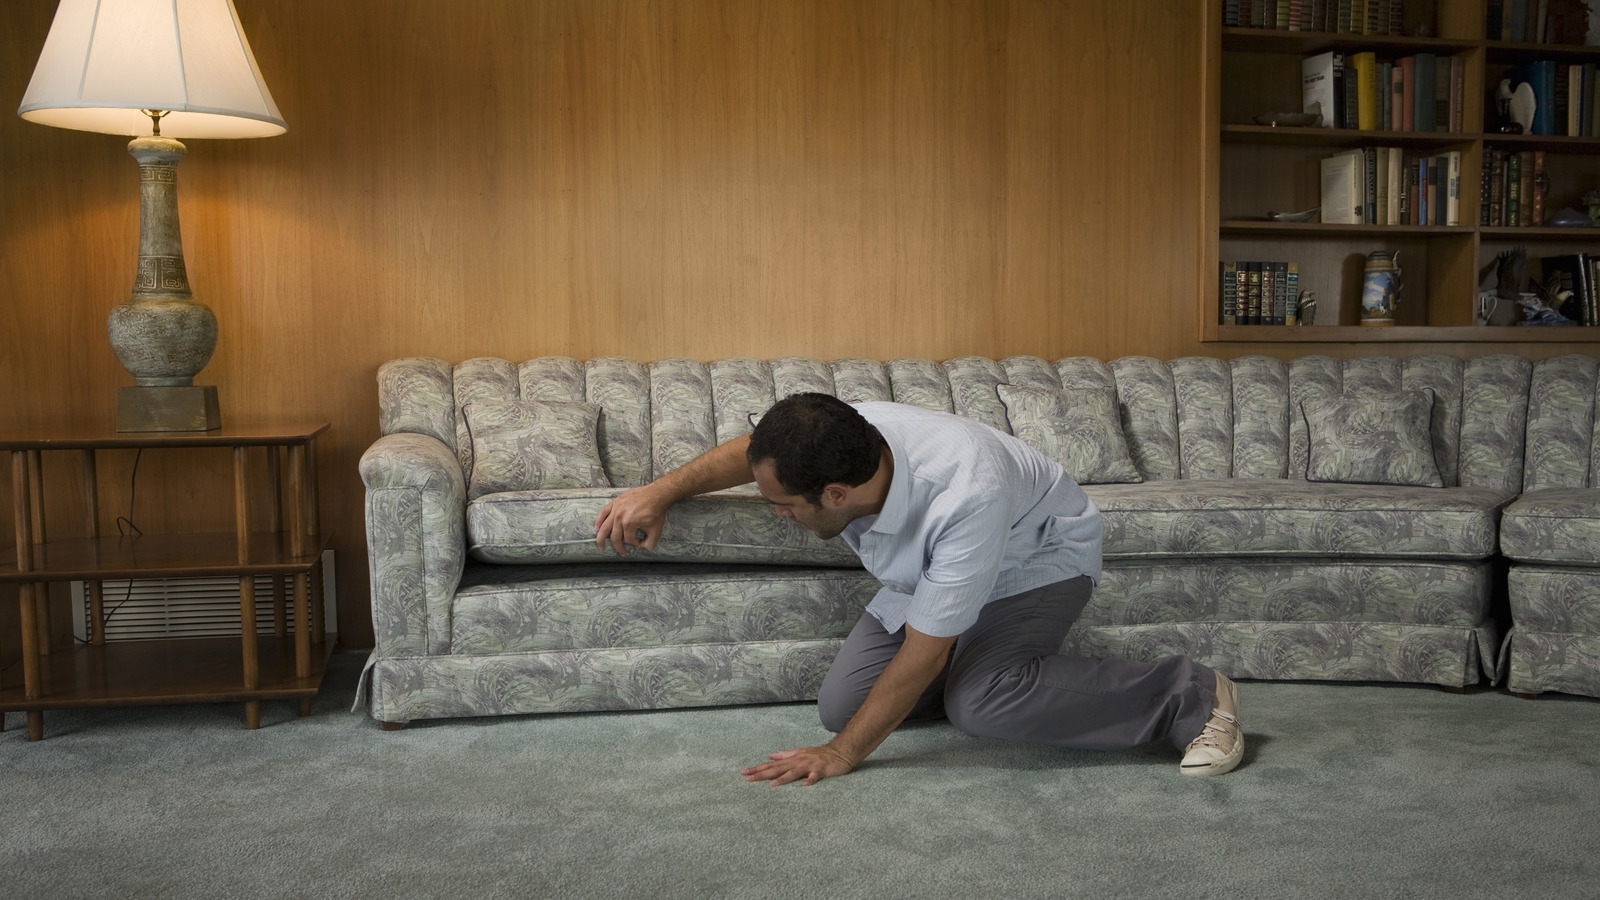 How to Keep Couch Cushions From Sliding  Couch cushions, Cushions on sofa,  Couch